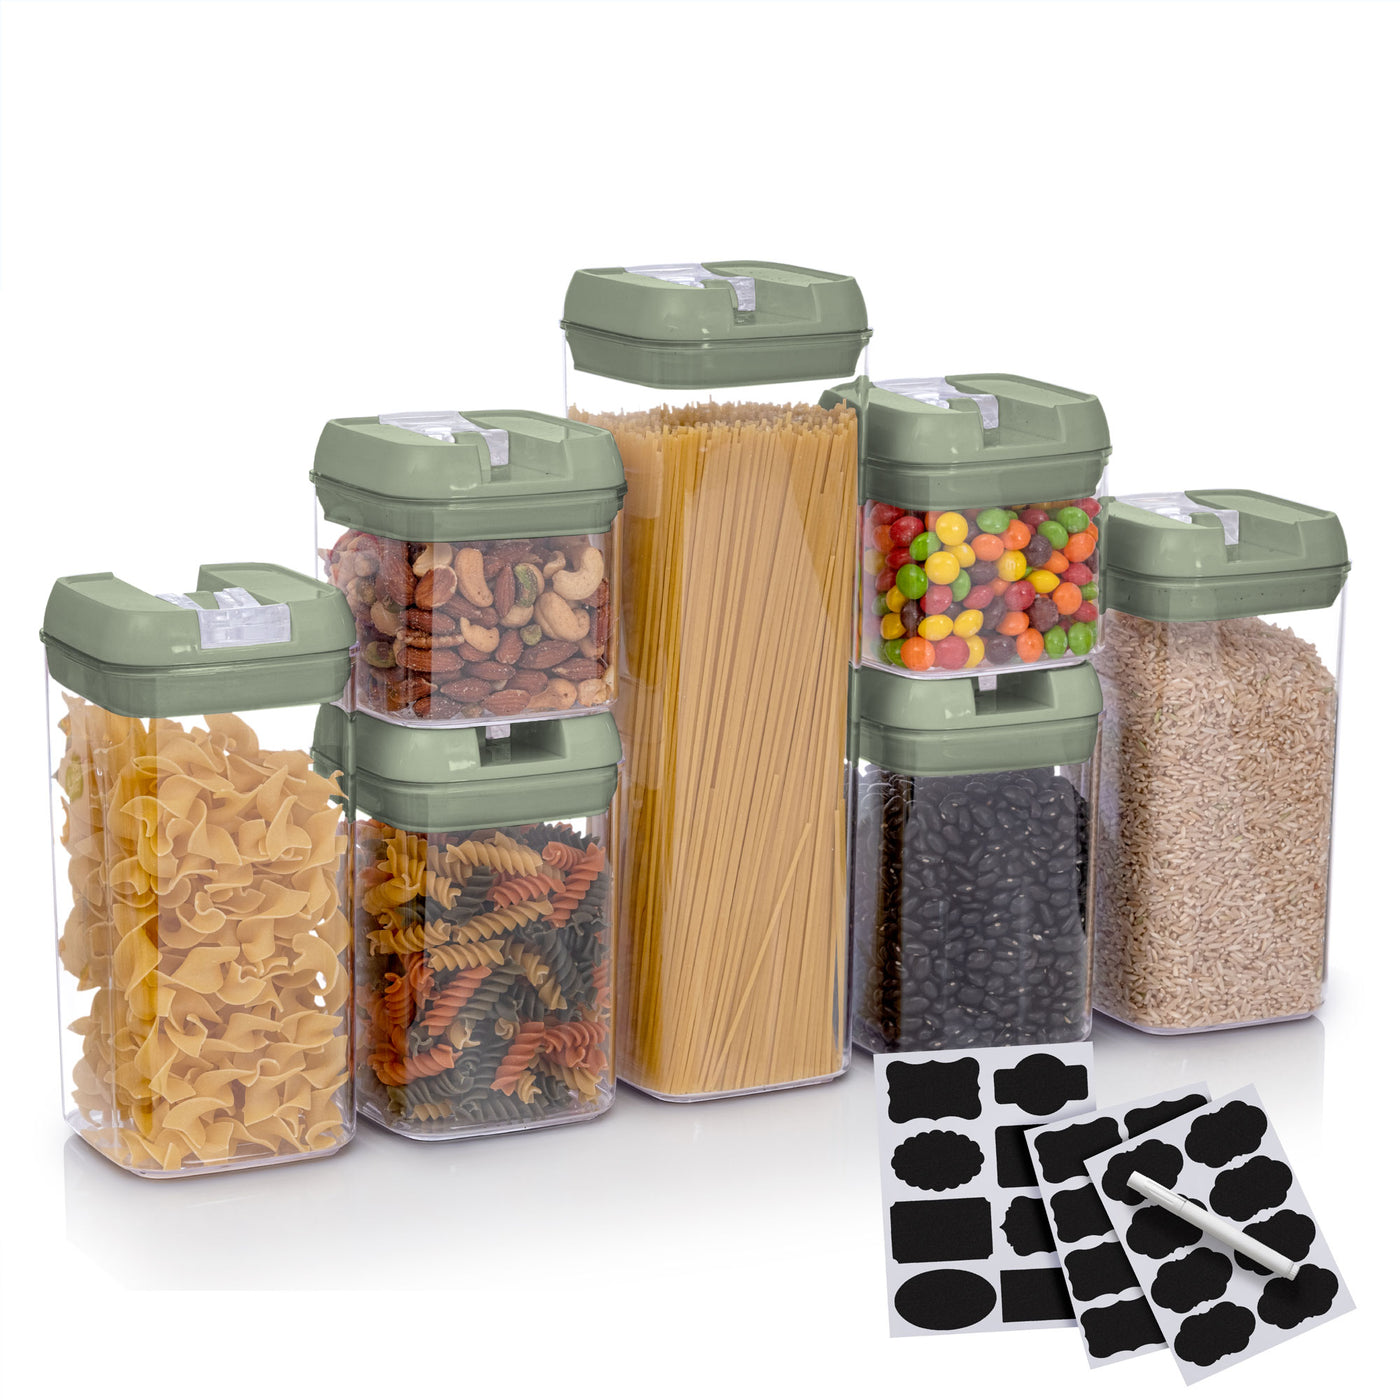 Cheer Collection Set of 7 Airtight Food Storage Containers plus Dry Er